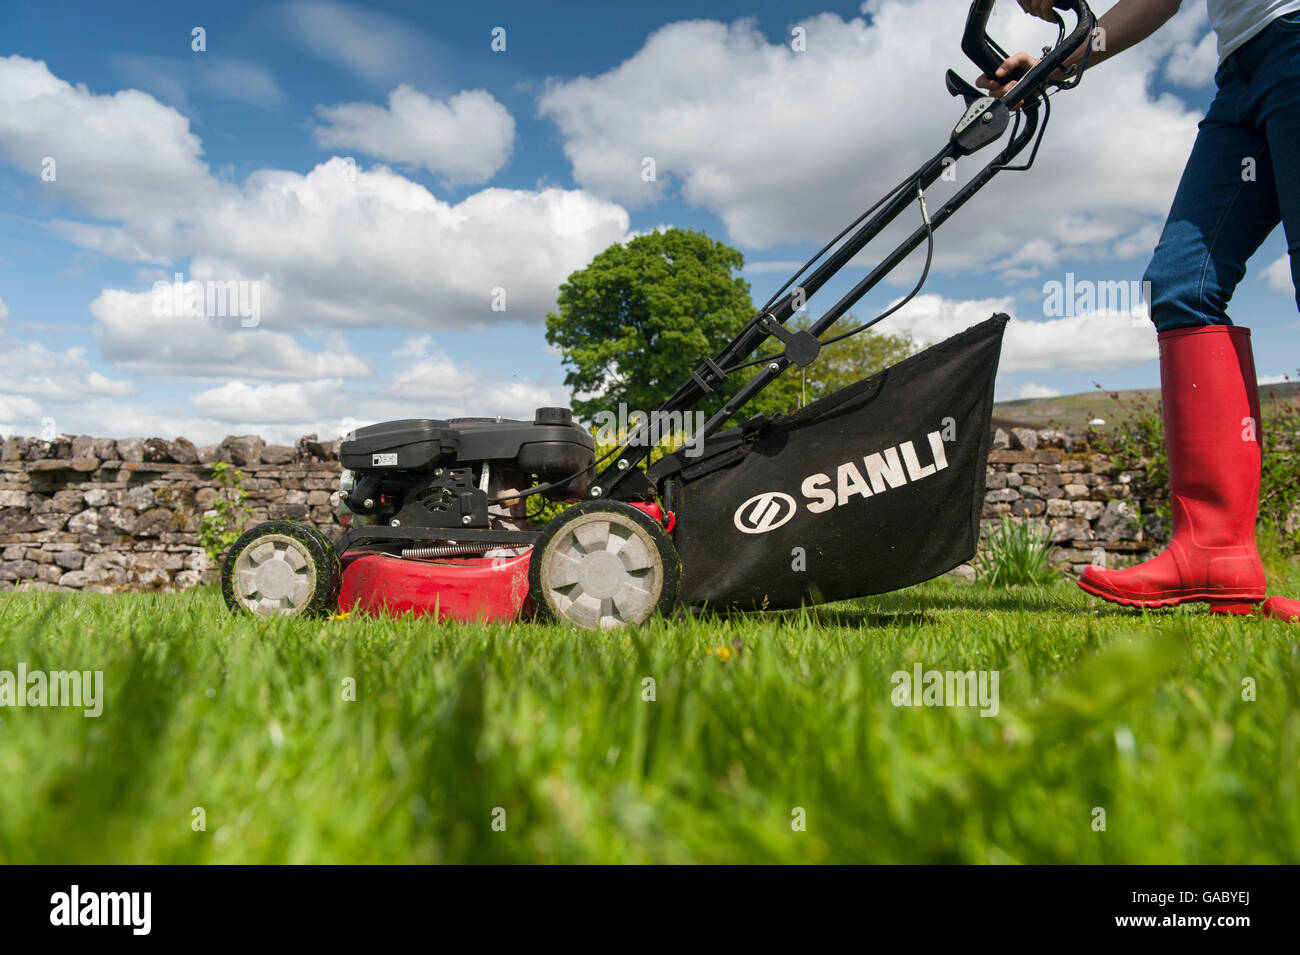 Lady mowing garden lawn with petrol powered mower. Hawes, North Yorkshire, UK. Stock Photo